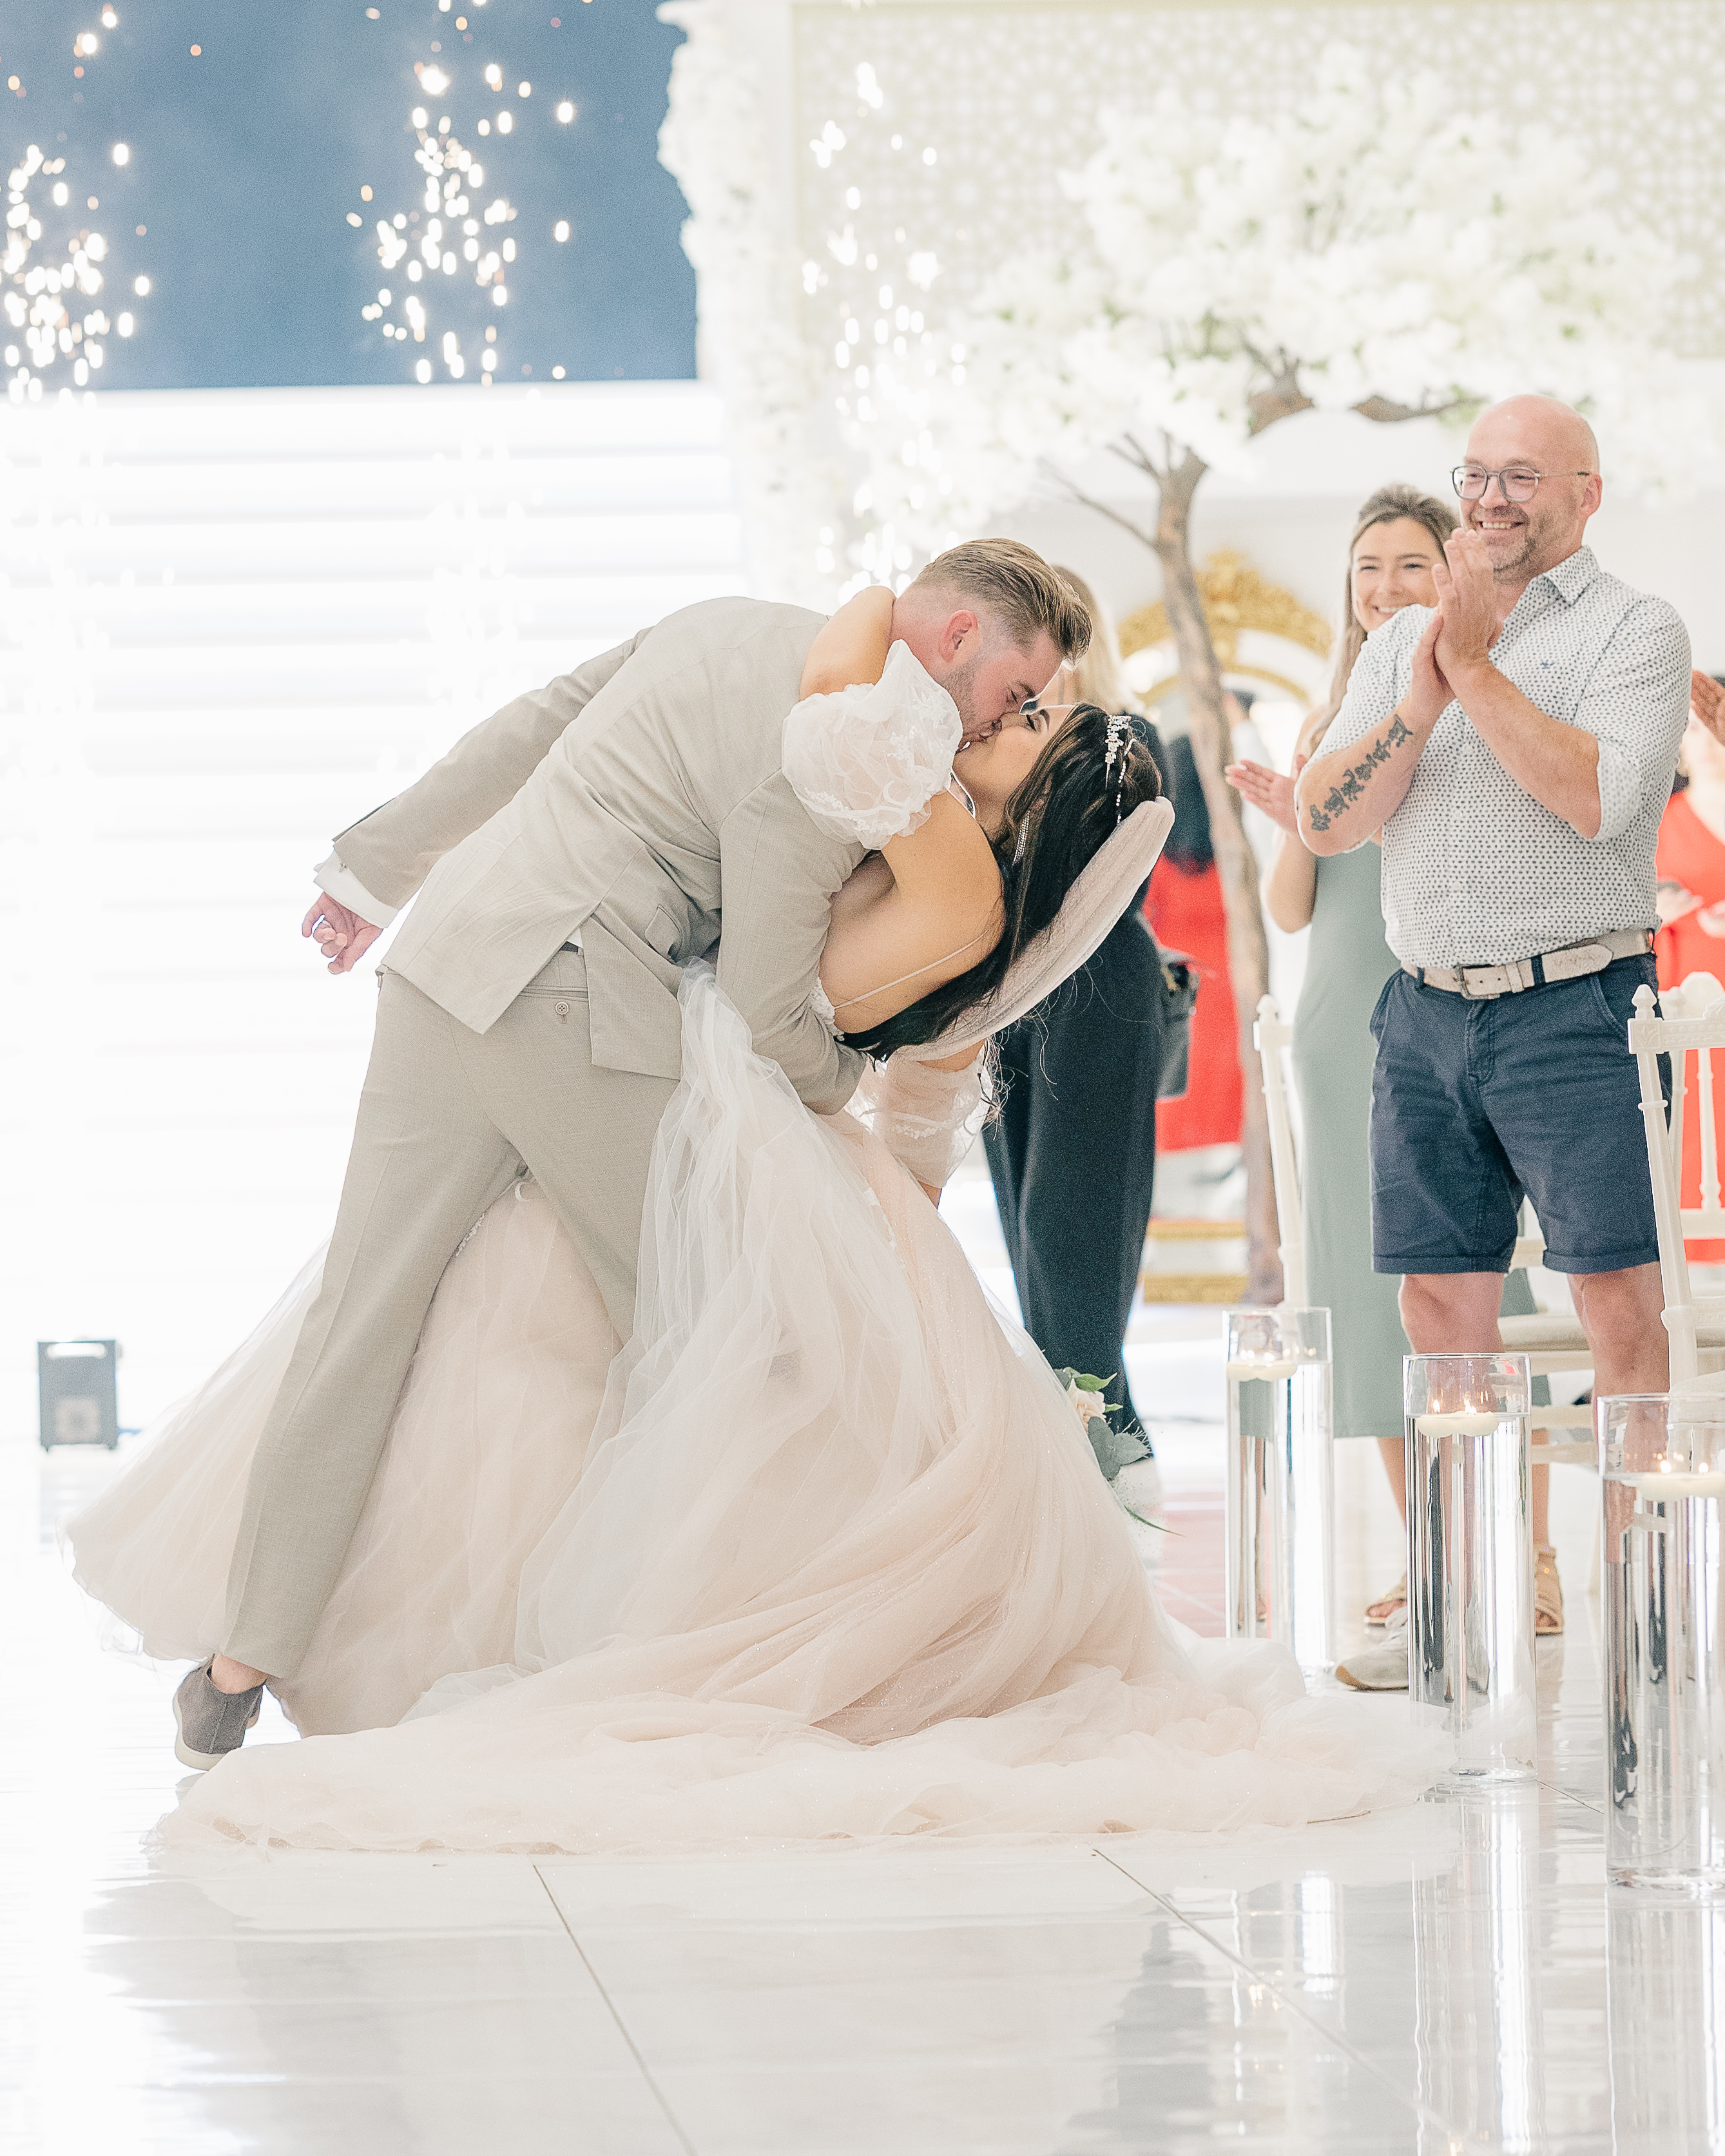 Recessional photo of groom dipping and kissing bride with fireworks